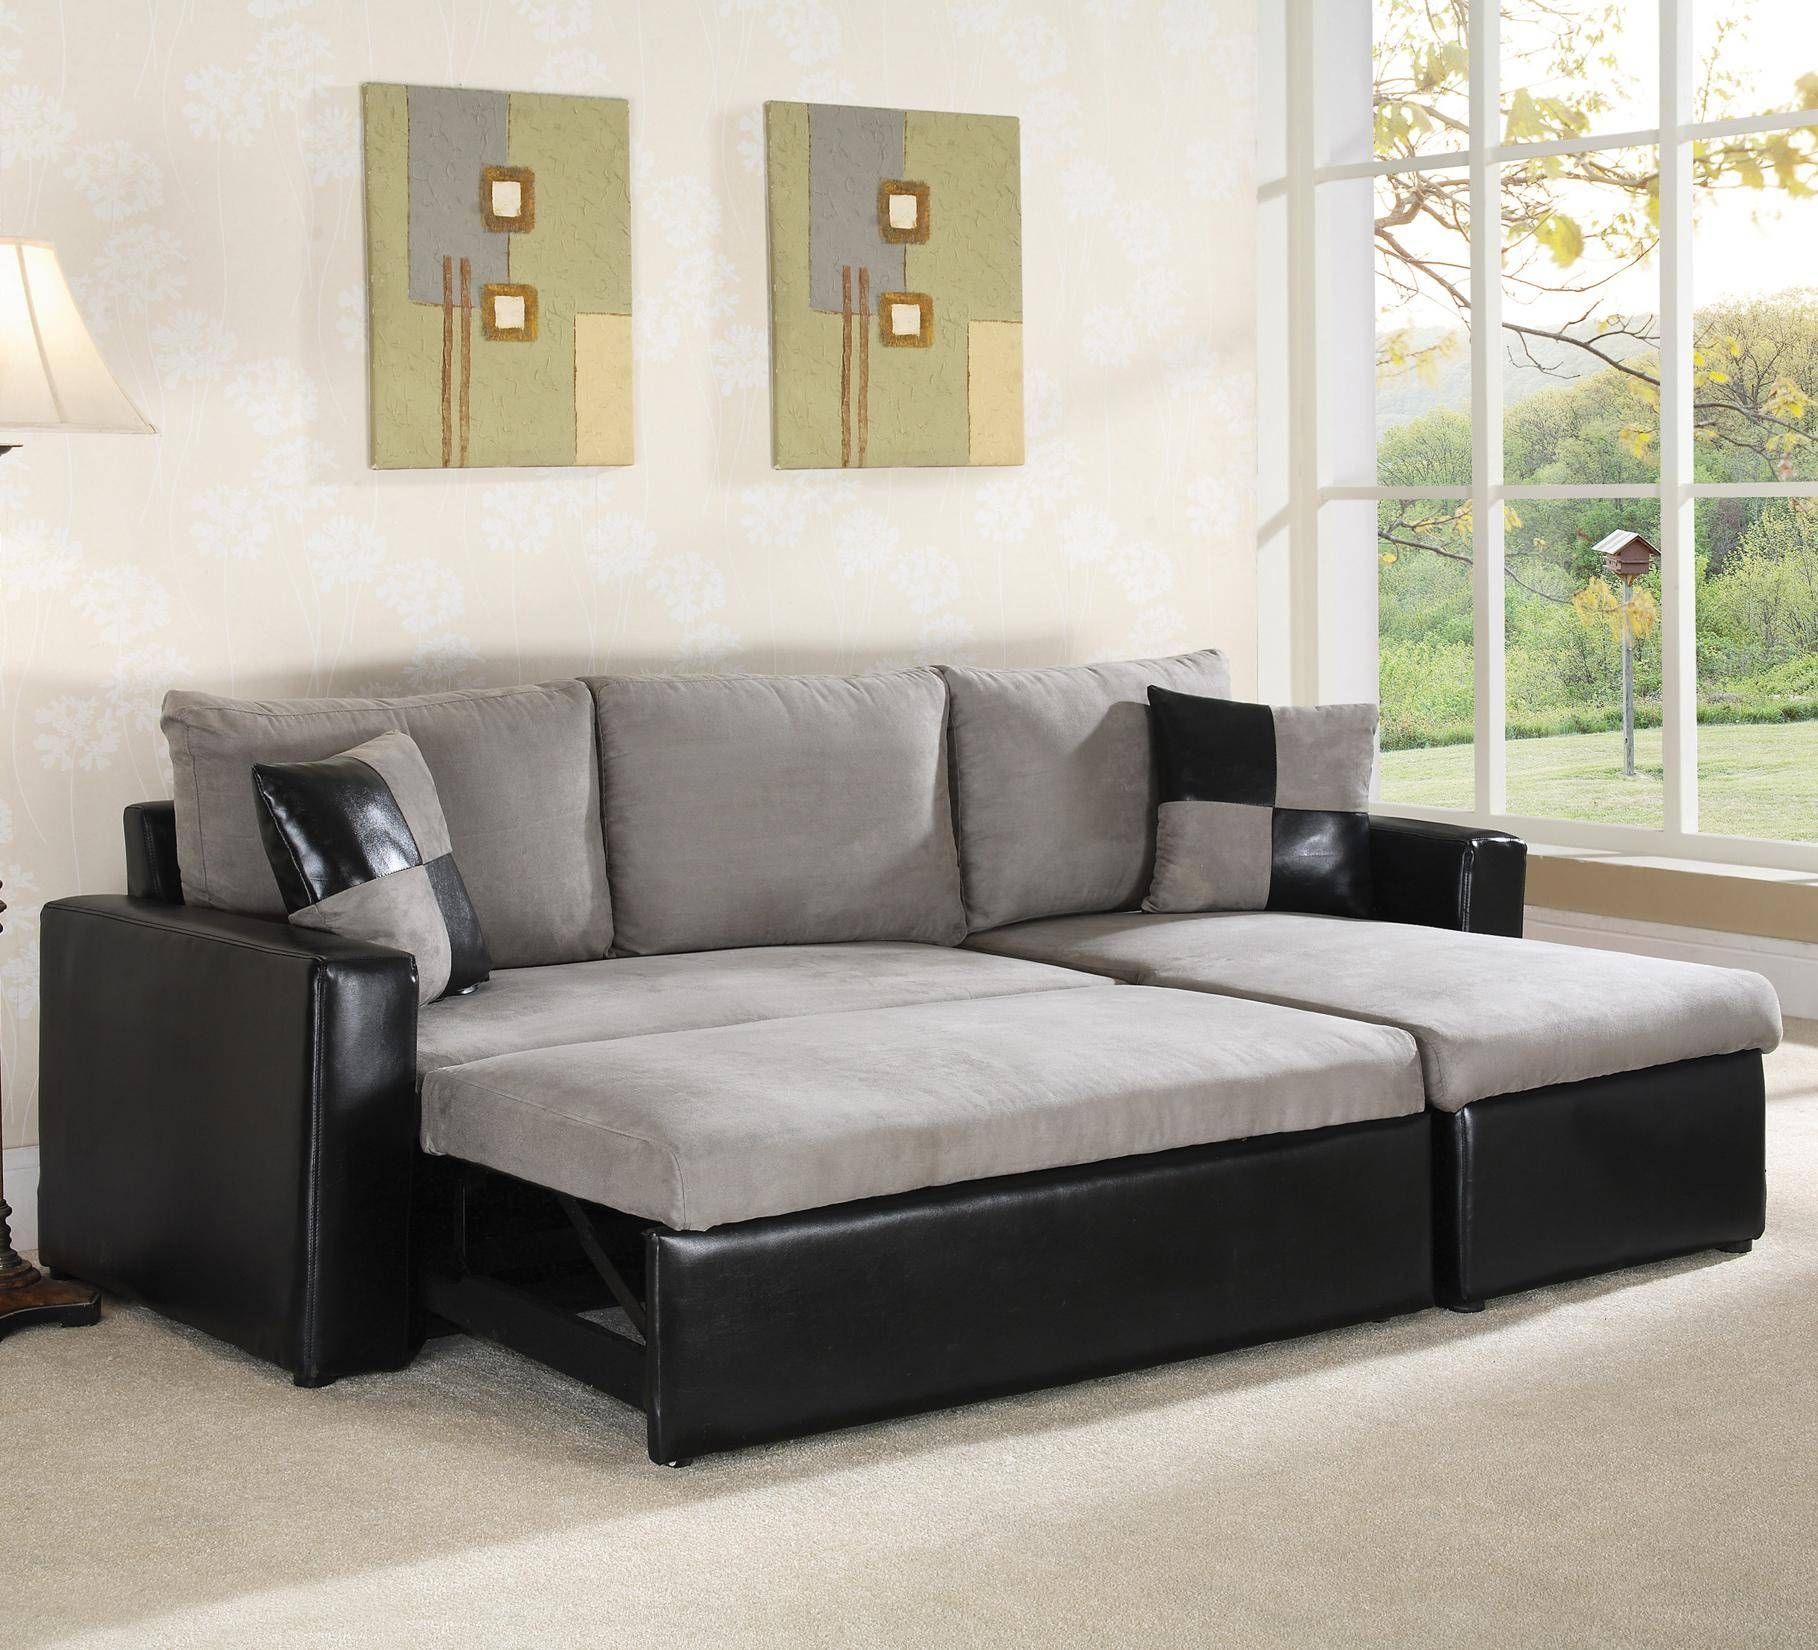 Wonderful Sleeper Sectional Sofa With Chaise Latest Cheap In Cozy Sectional Sofas (View 25 of 30)